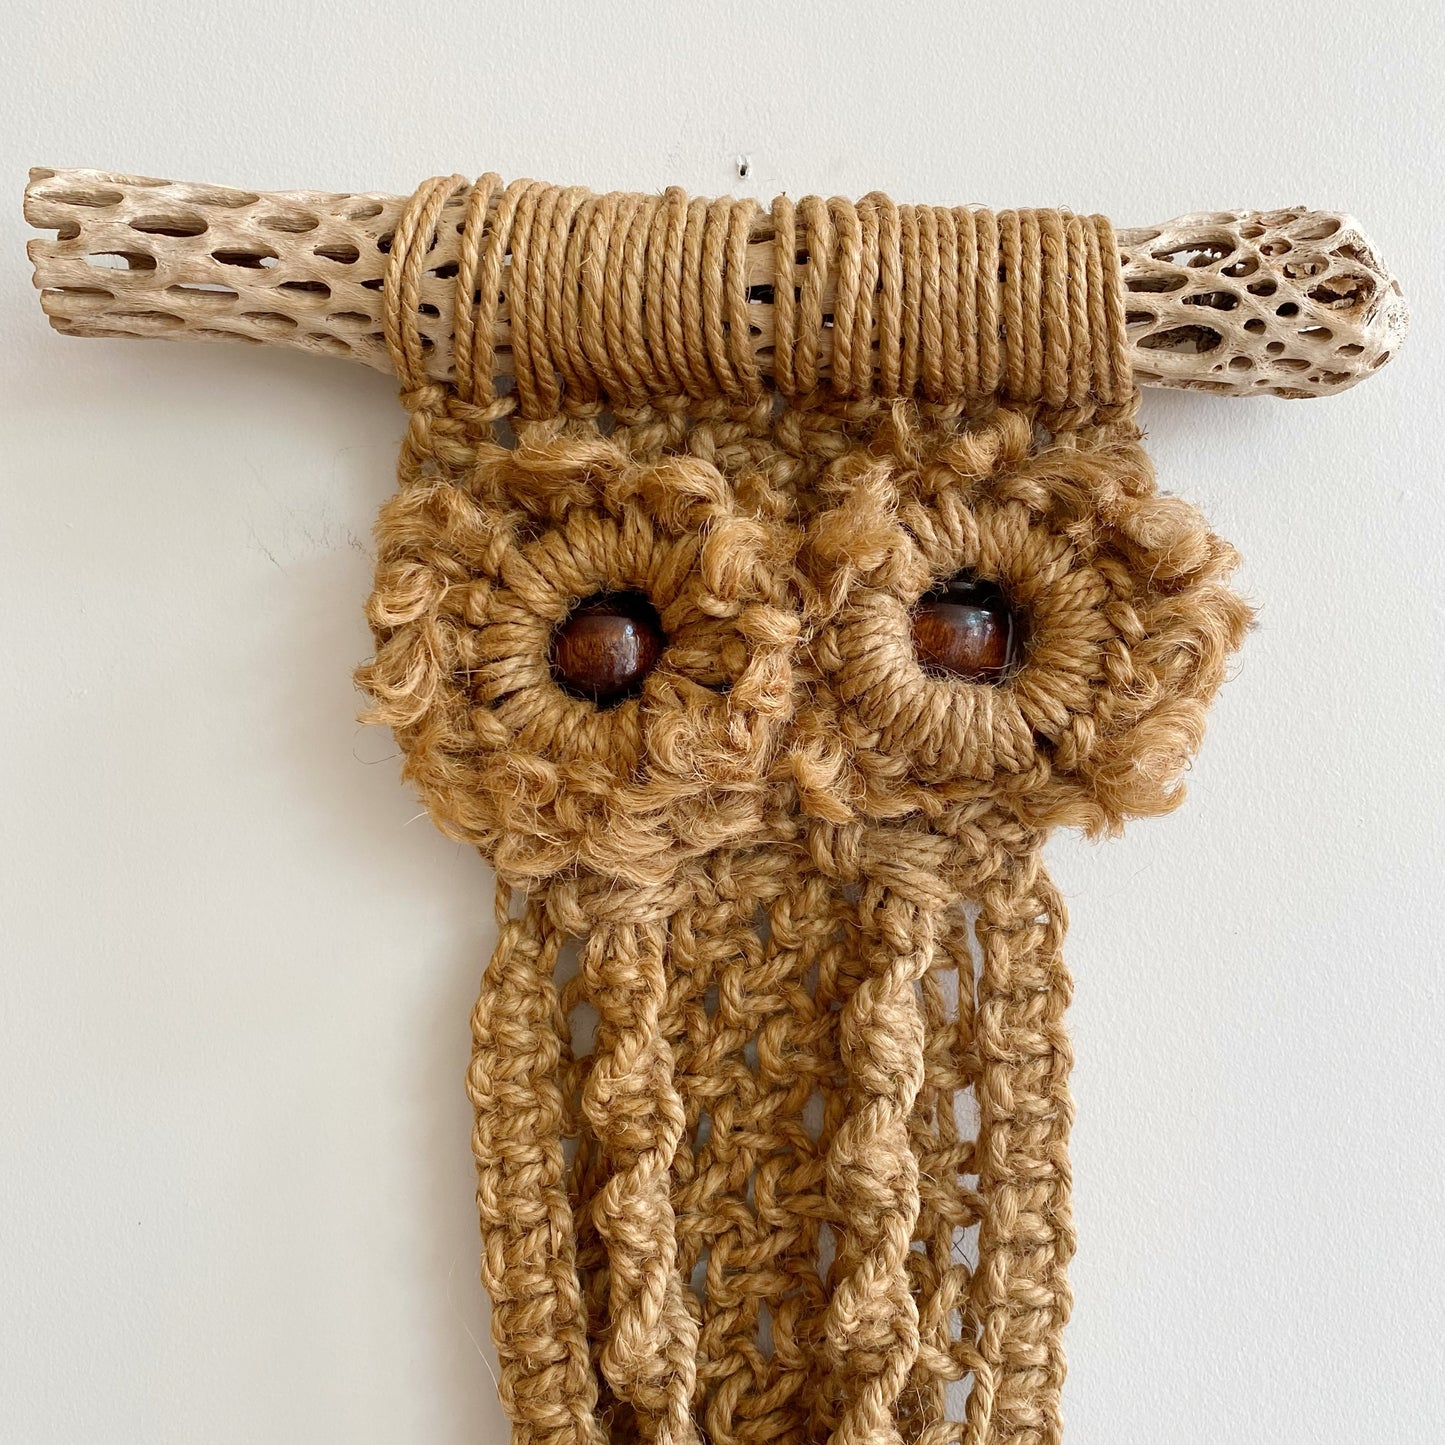 XL Vintage Macrame Owl with Dried Cactus